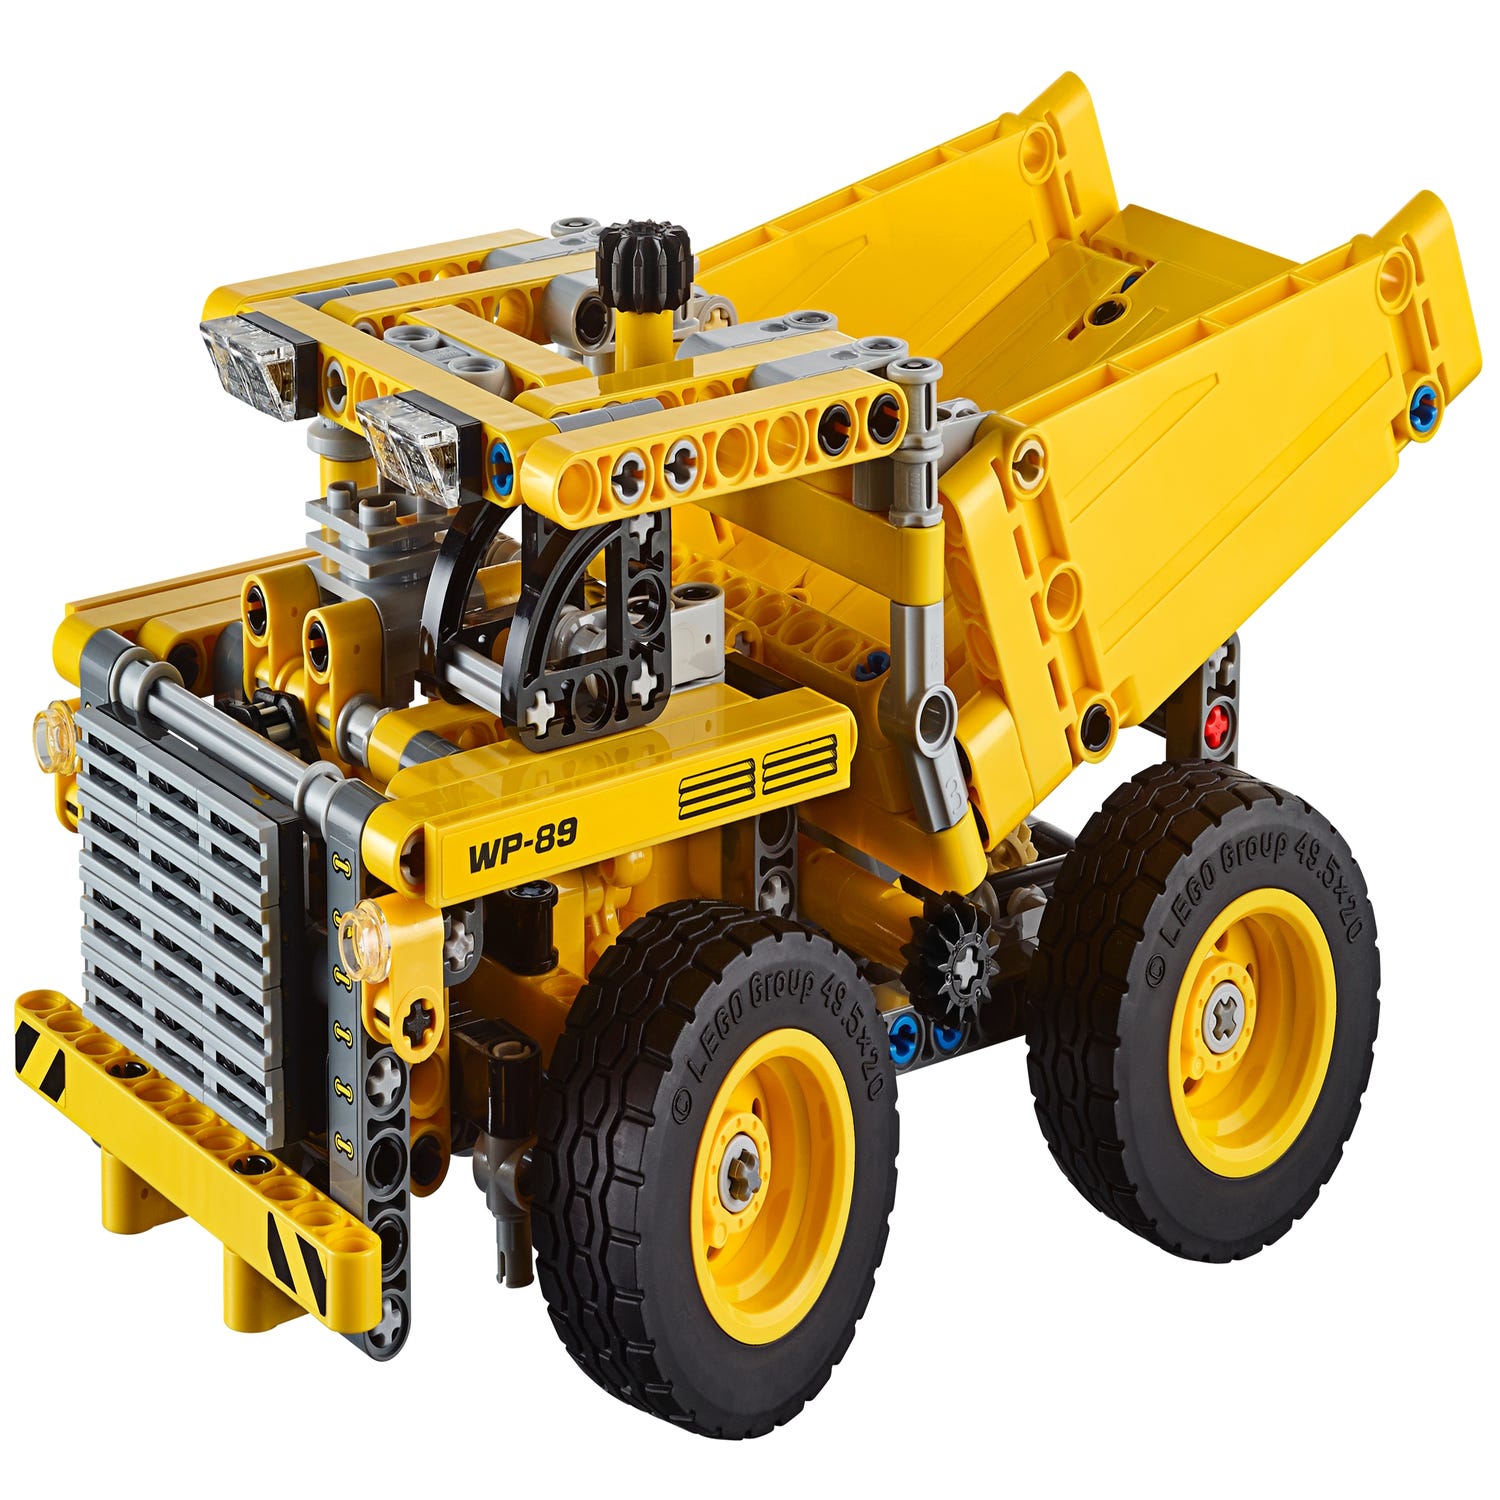 Truck 42035 | Technic™ Buy online at the Official LEGO® Shop US